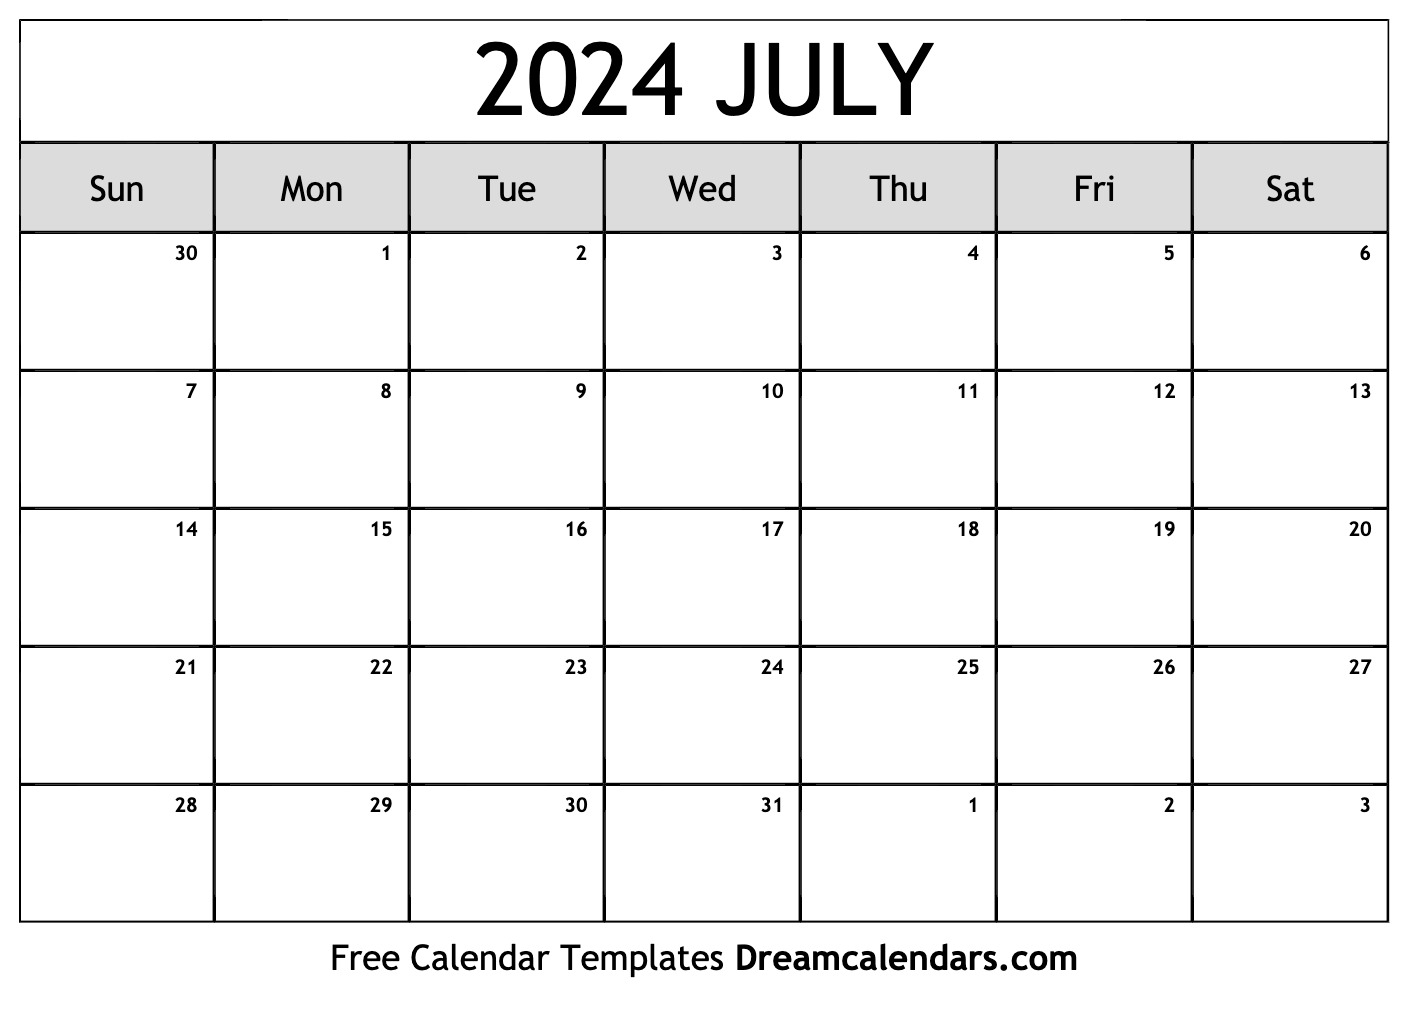 July 2024 Calendar | Free Blank Printable With Holidays for July 2024 Calendar Printable